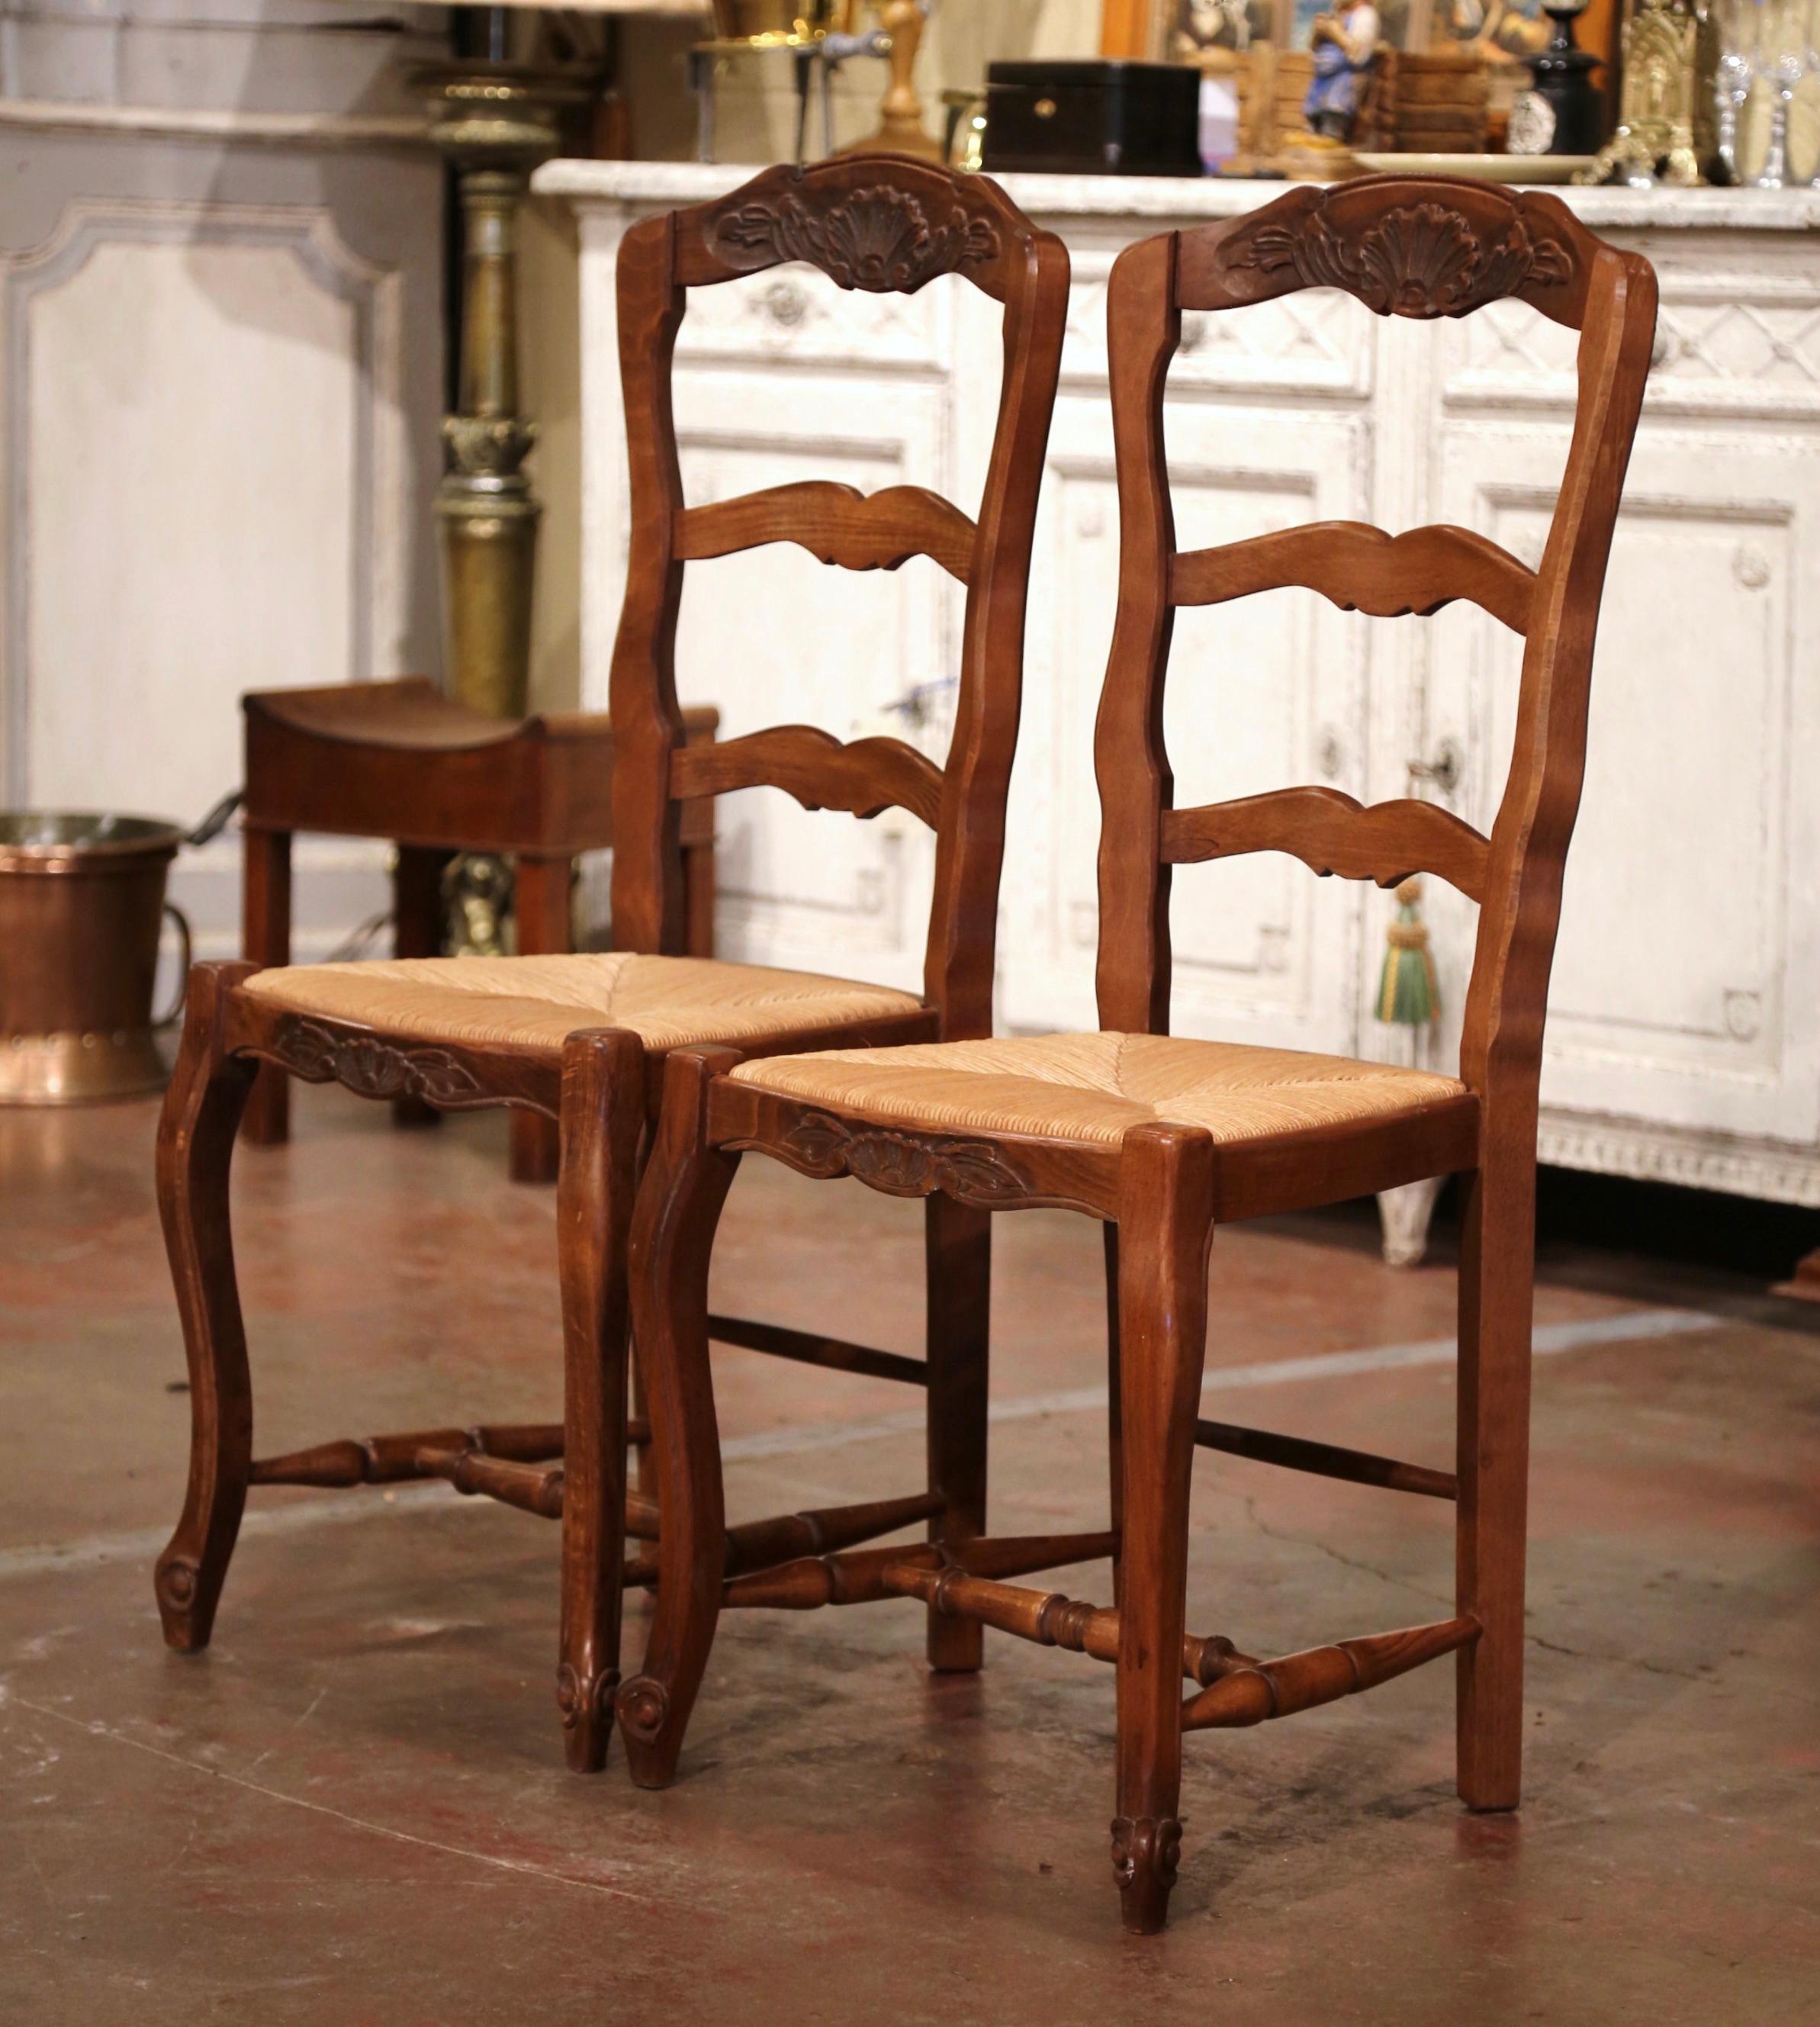 Decorate a bedroom with this elegant pair of antique chairs. Hand carved from beech wood in Normandy France circa 1930, each chair stands on front cabriole legs with bottom stretcher, over a scalloped and bowed apron. The three-ladder back features